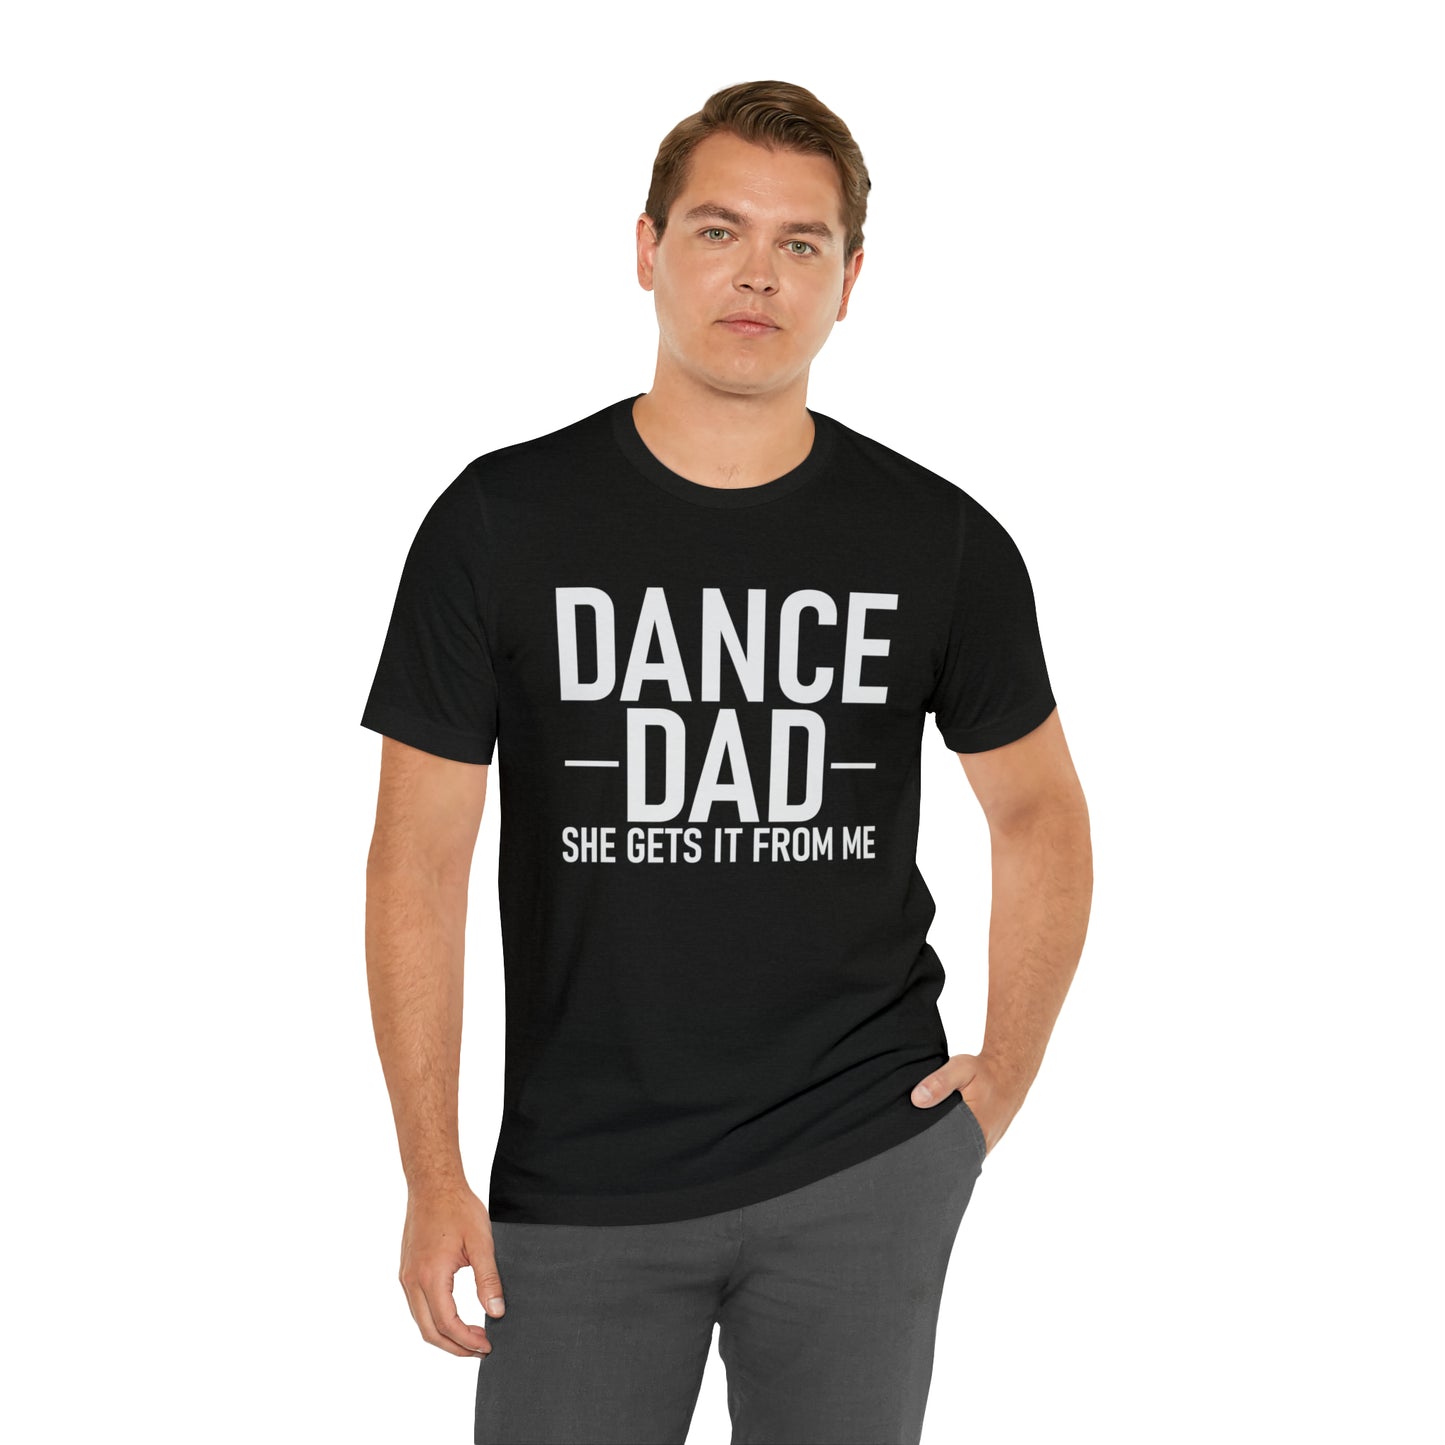 DANCE DAD - she gets it from me  Short Sleeve Unisex Adult Tee